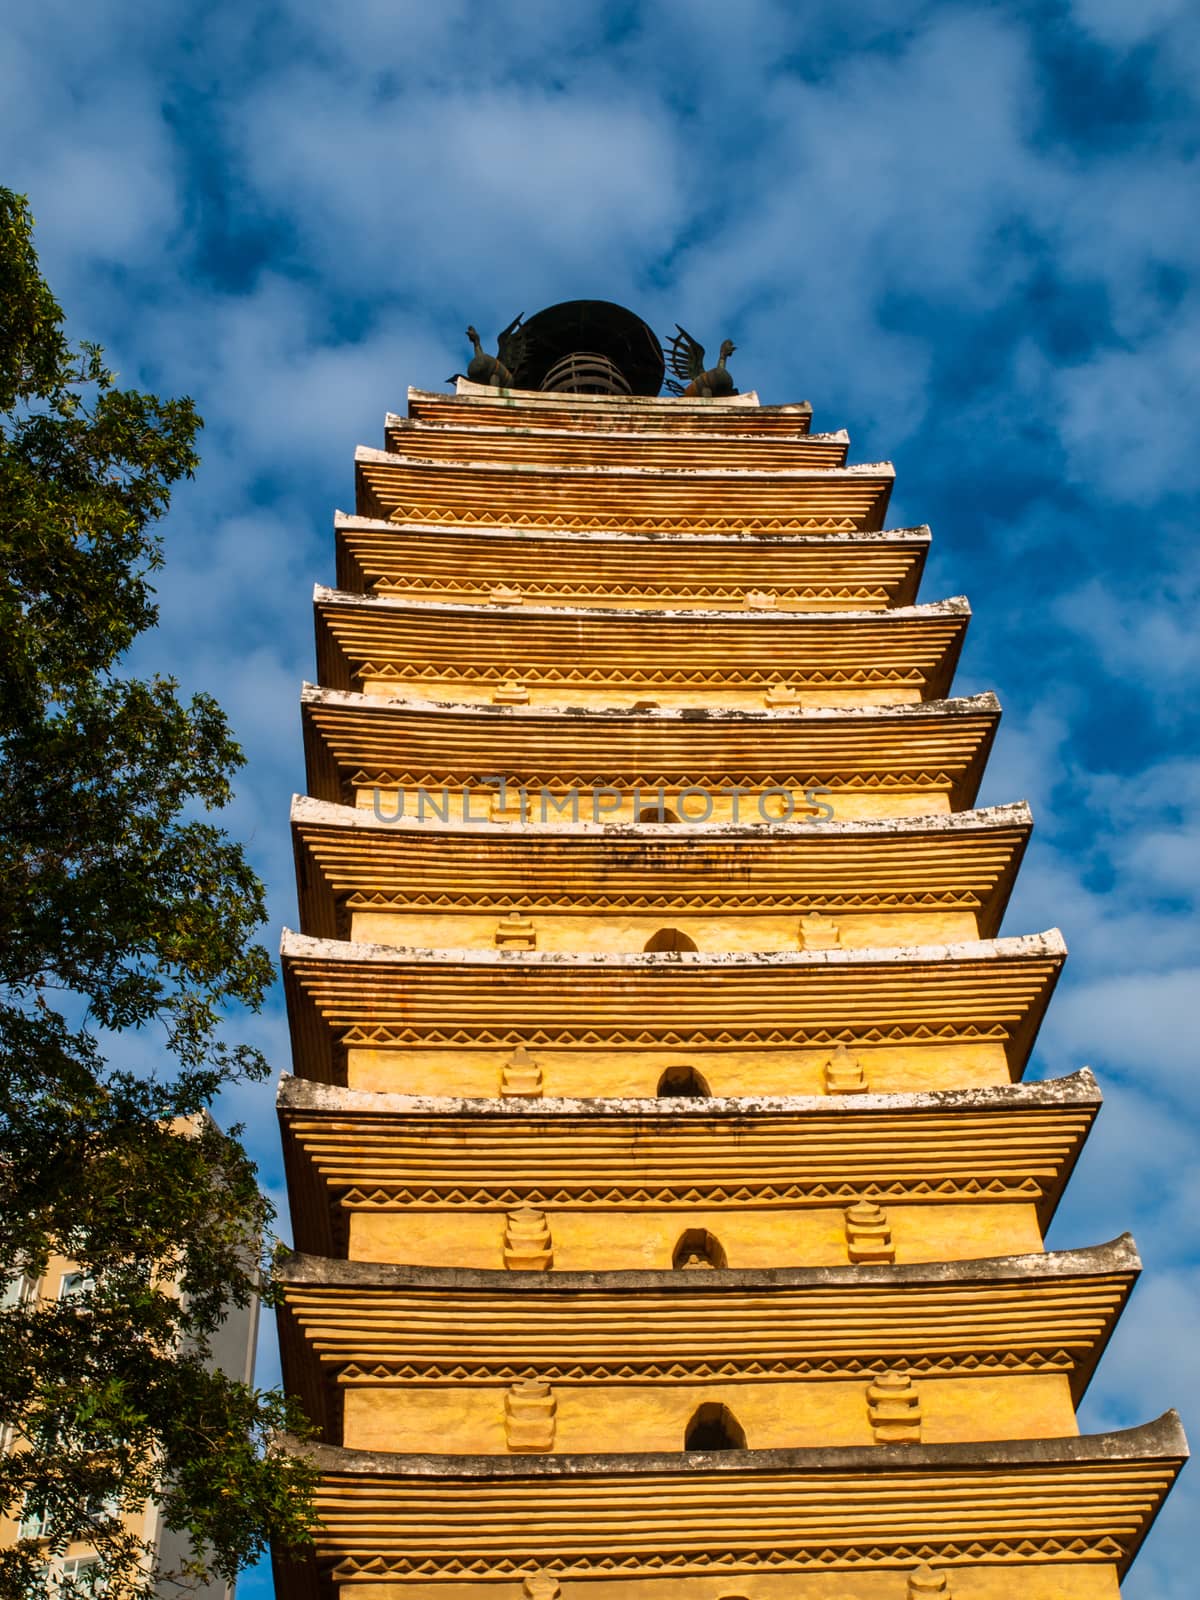 Eastern pagoda in Kunming by pyty